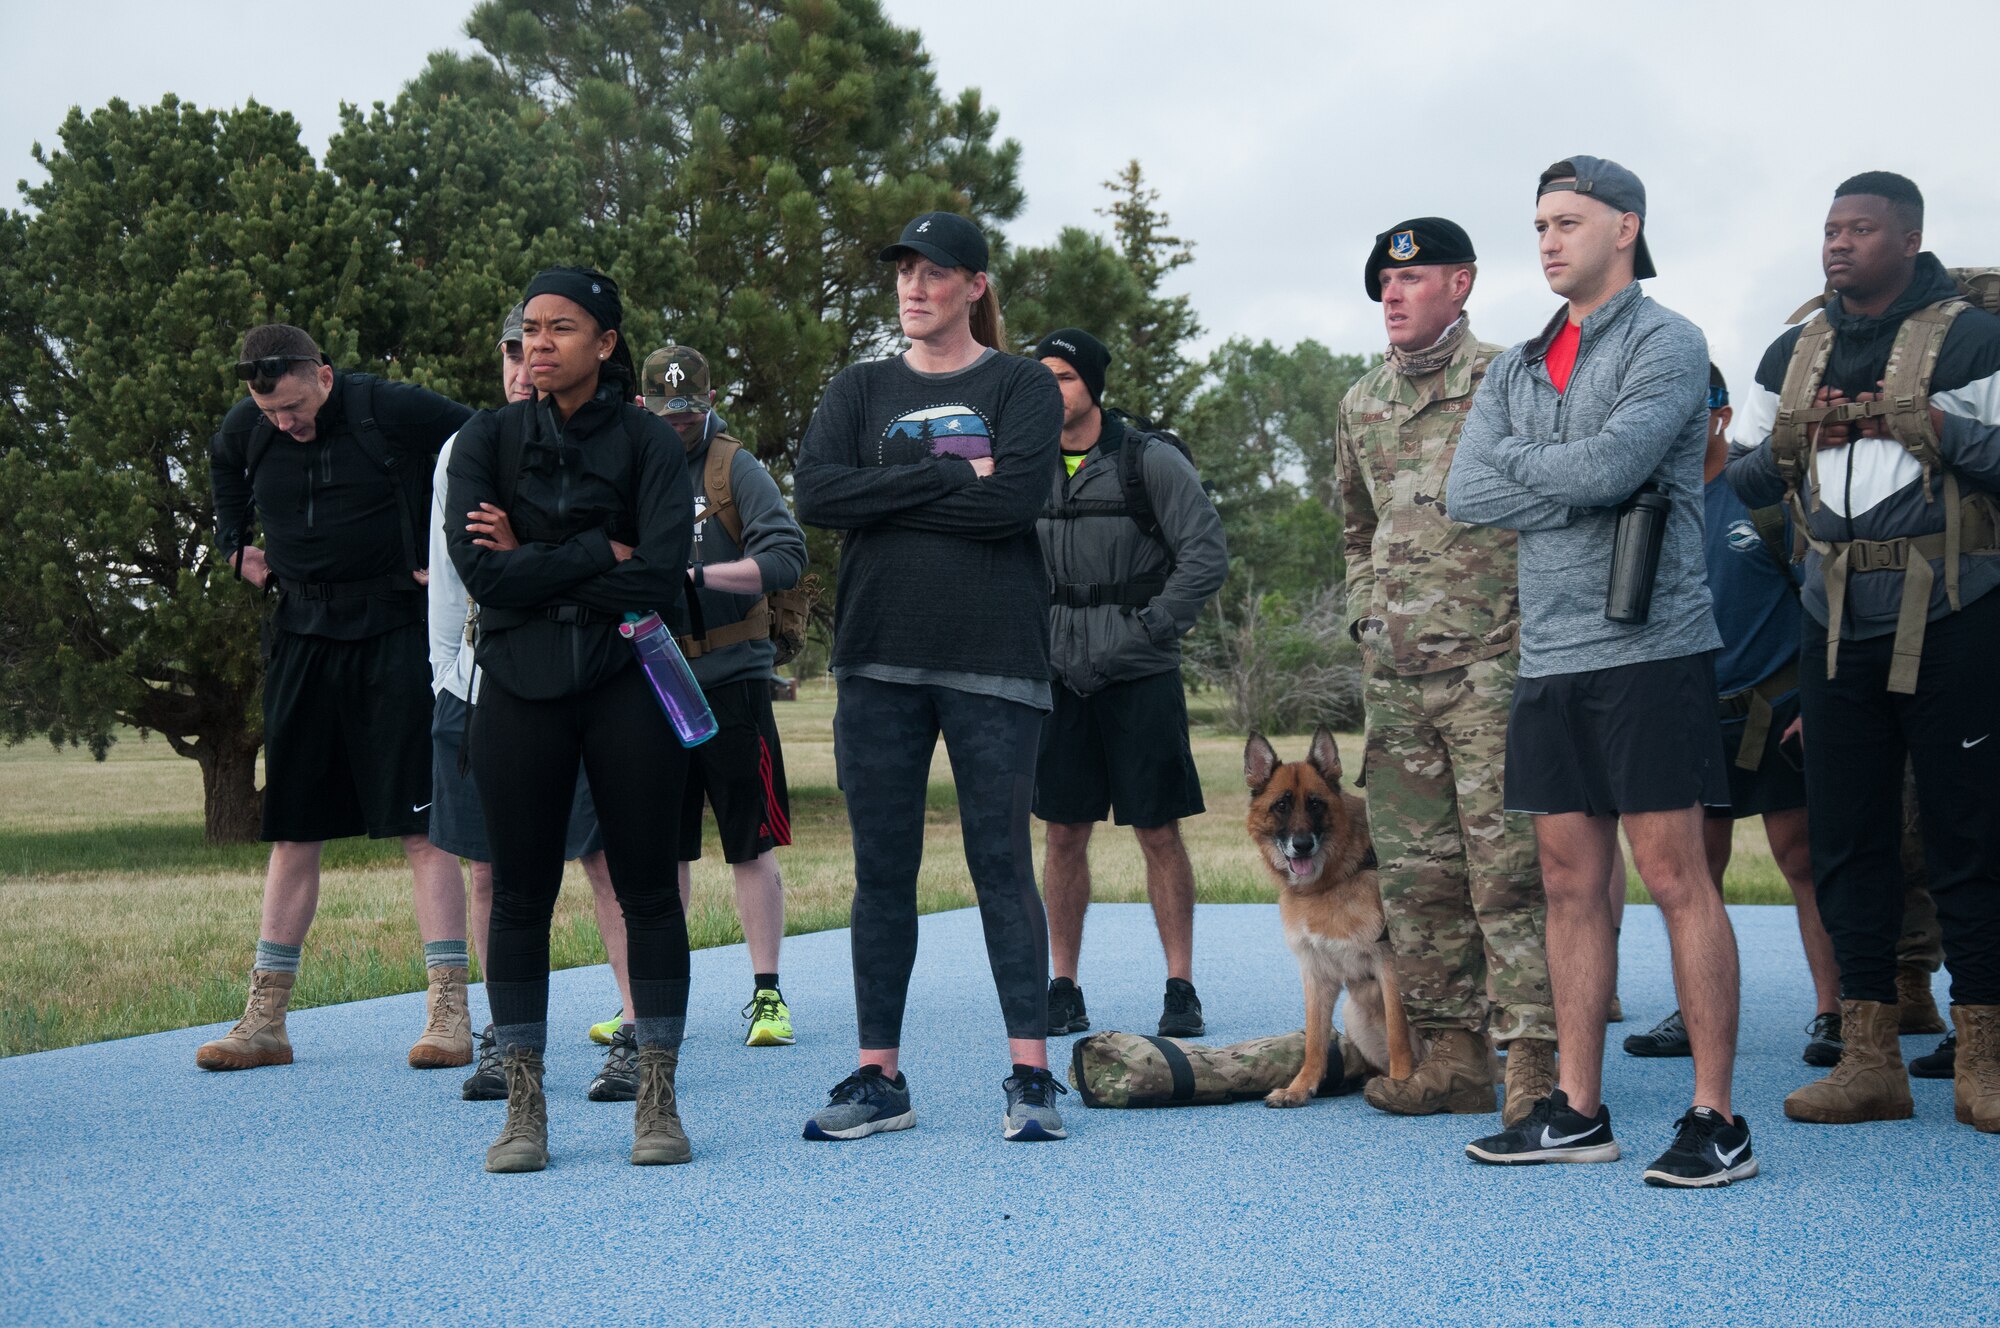 The ruck march was an event organized by 20th Air Force headquarters staff to build comradery and create a space for difficult conversations about racism and discrimination. U.S. Air Force photo by 1st Lt Ieva Bytautaite.